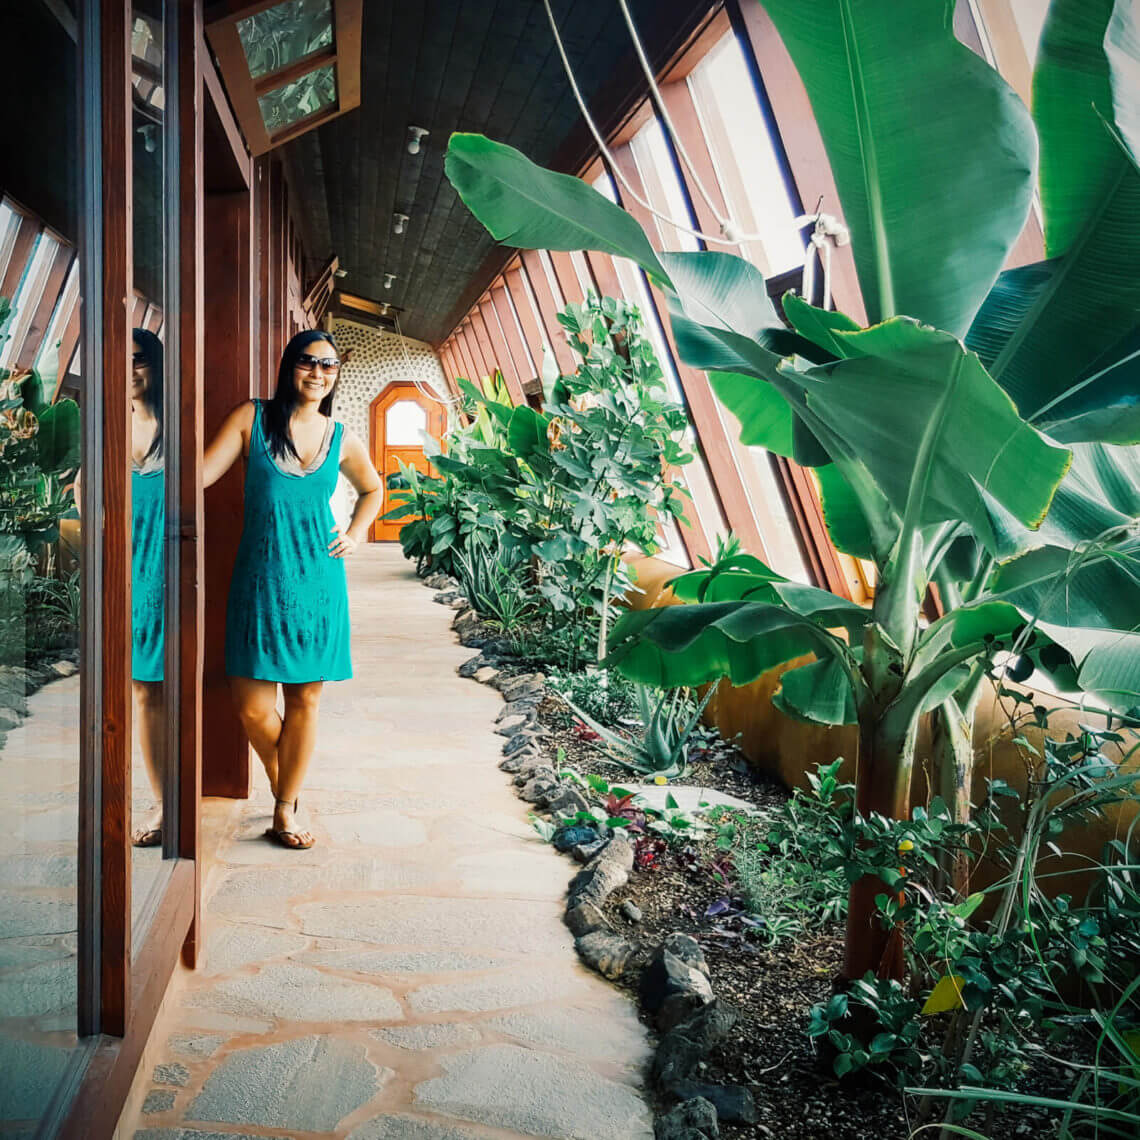 I stayed in an Earthship: eco living in the high desert